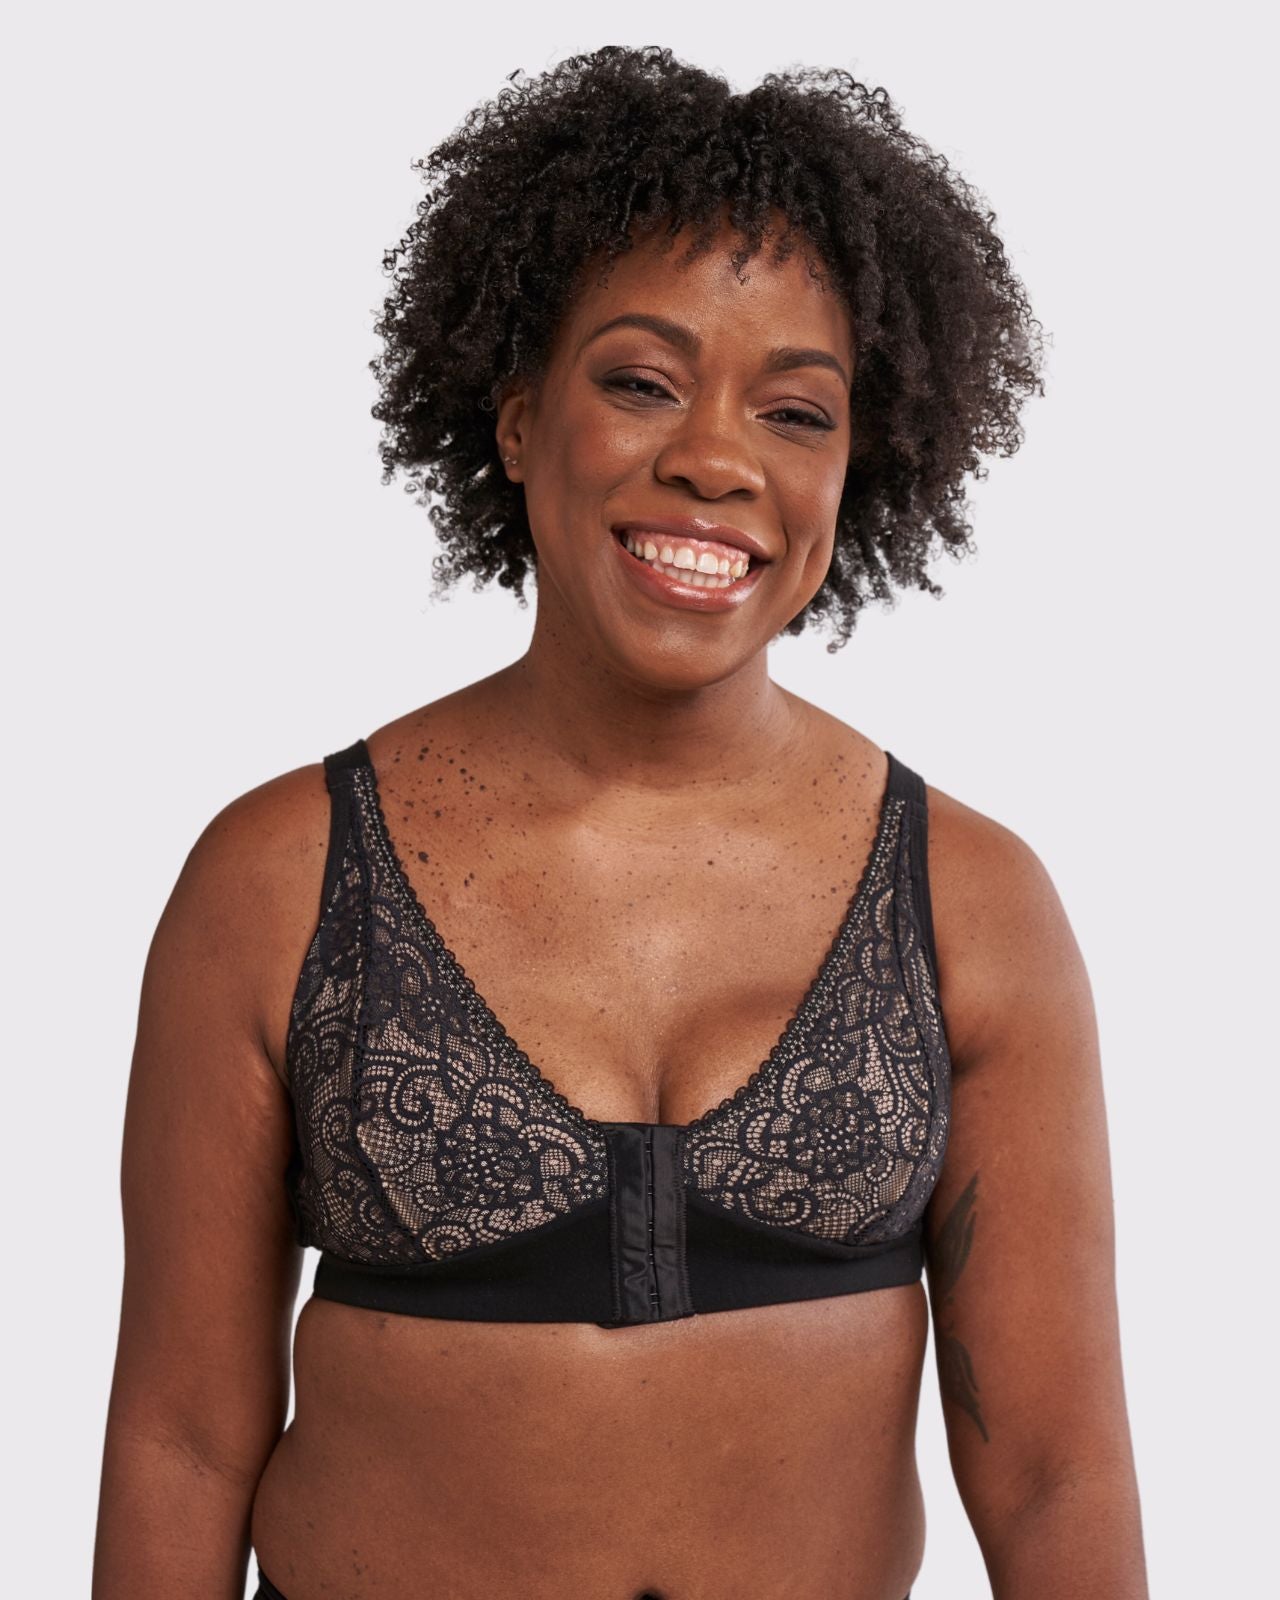 AnaOno Women's JamieLee Lace Front Closure Mastectomy Bralette Champagne -  Small